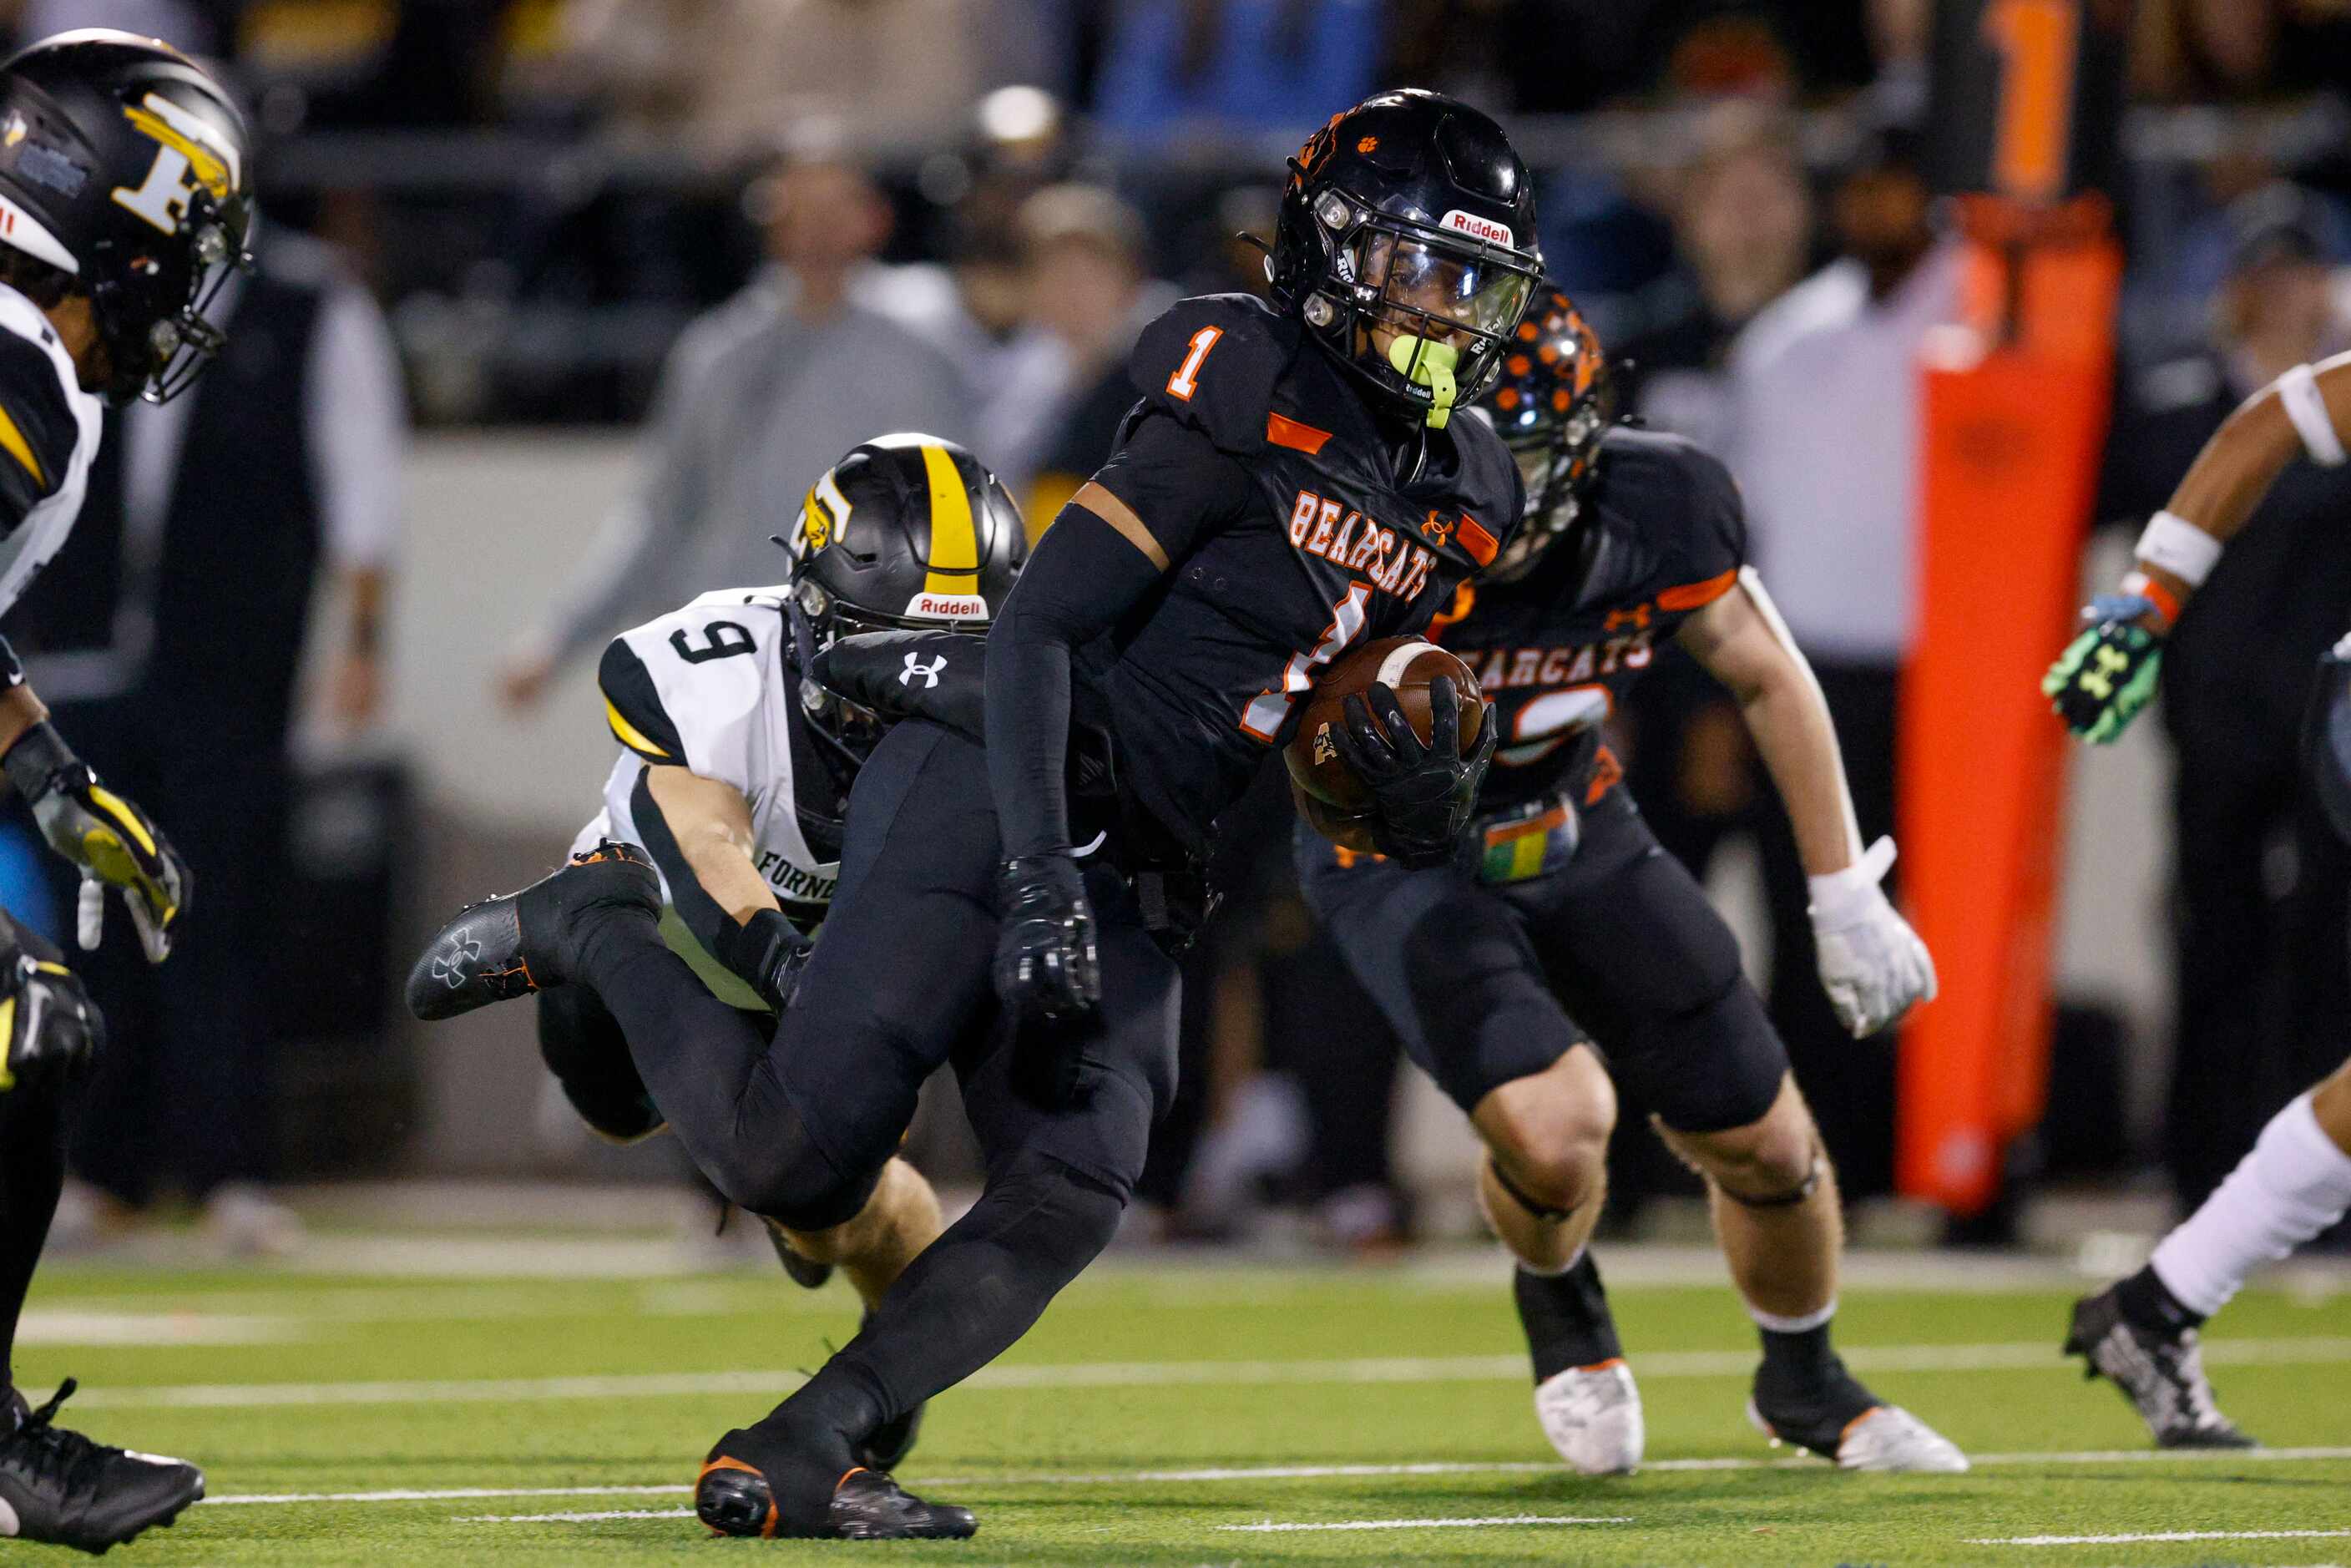 Aledo running back Hawk Patrick-Daniels (1) runs through a tackle attempt from Forney...